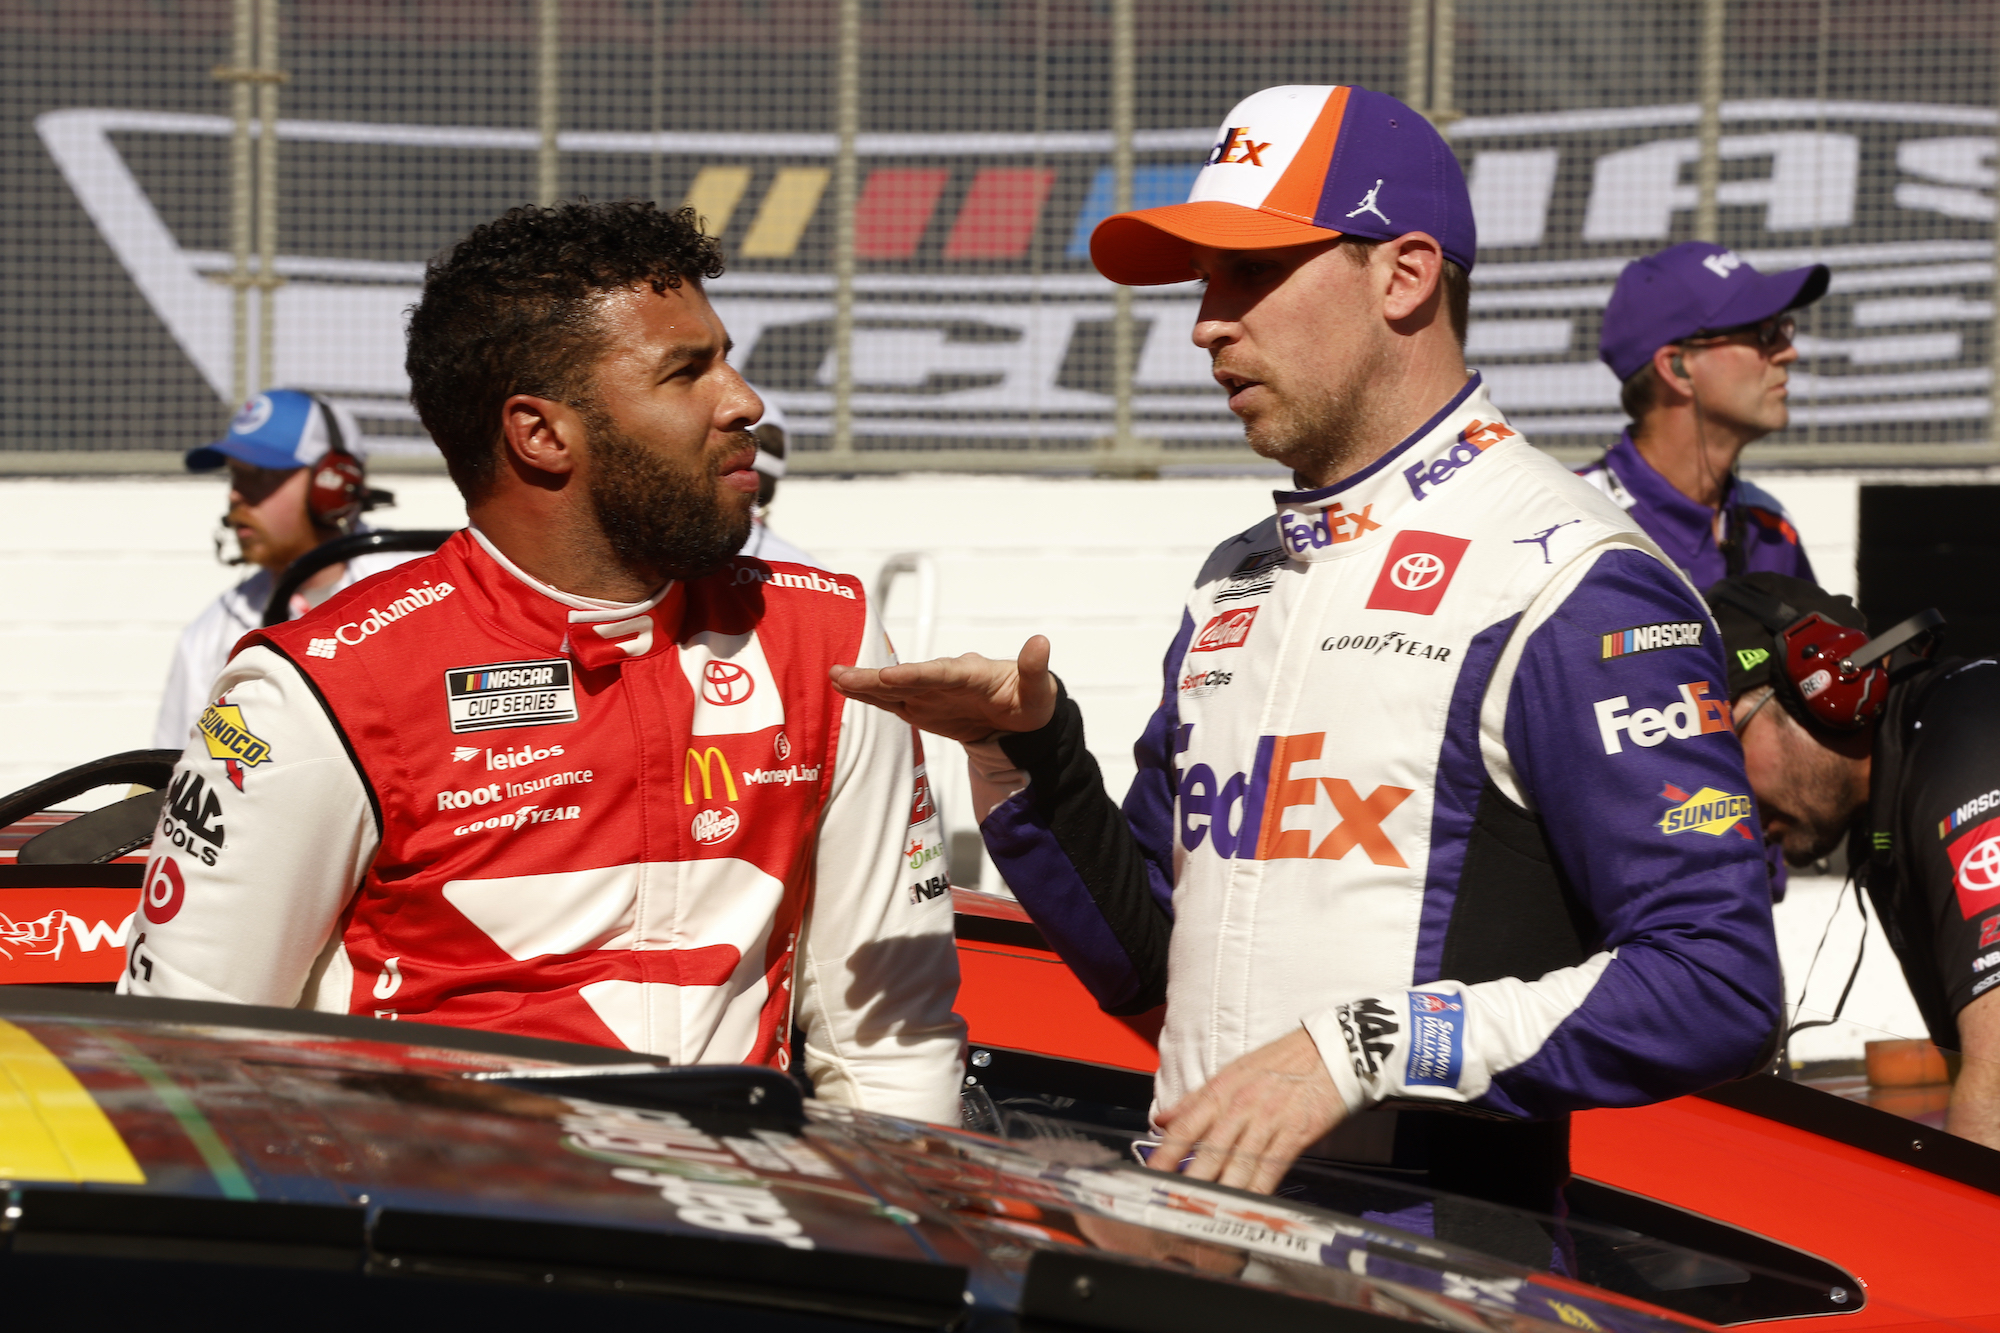 Bubba Wallace Candidly Addresses 23XI Racing Boss Denny Hamlin’s Insensitive Tweet That Landed Him in Hot Water